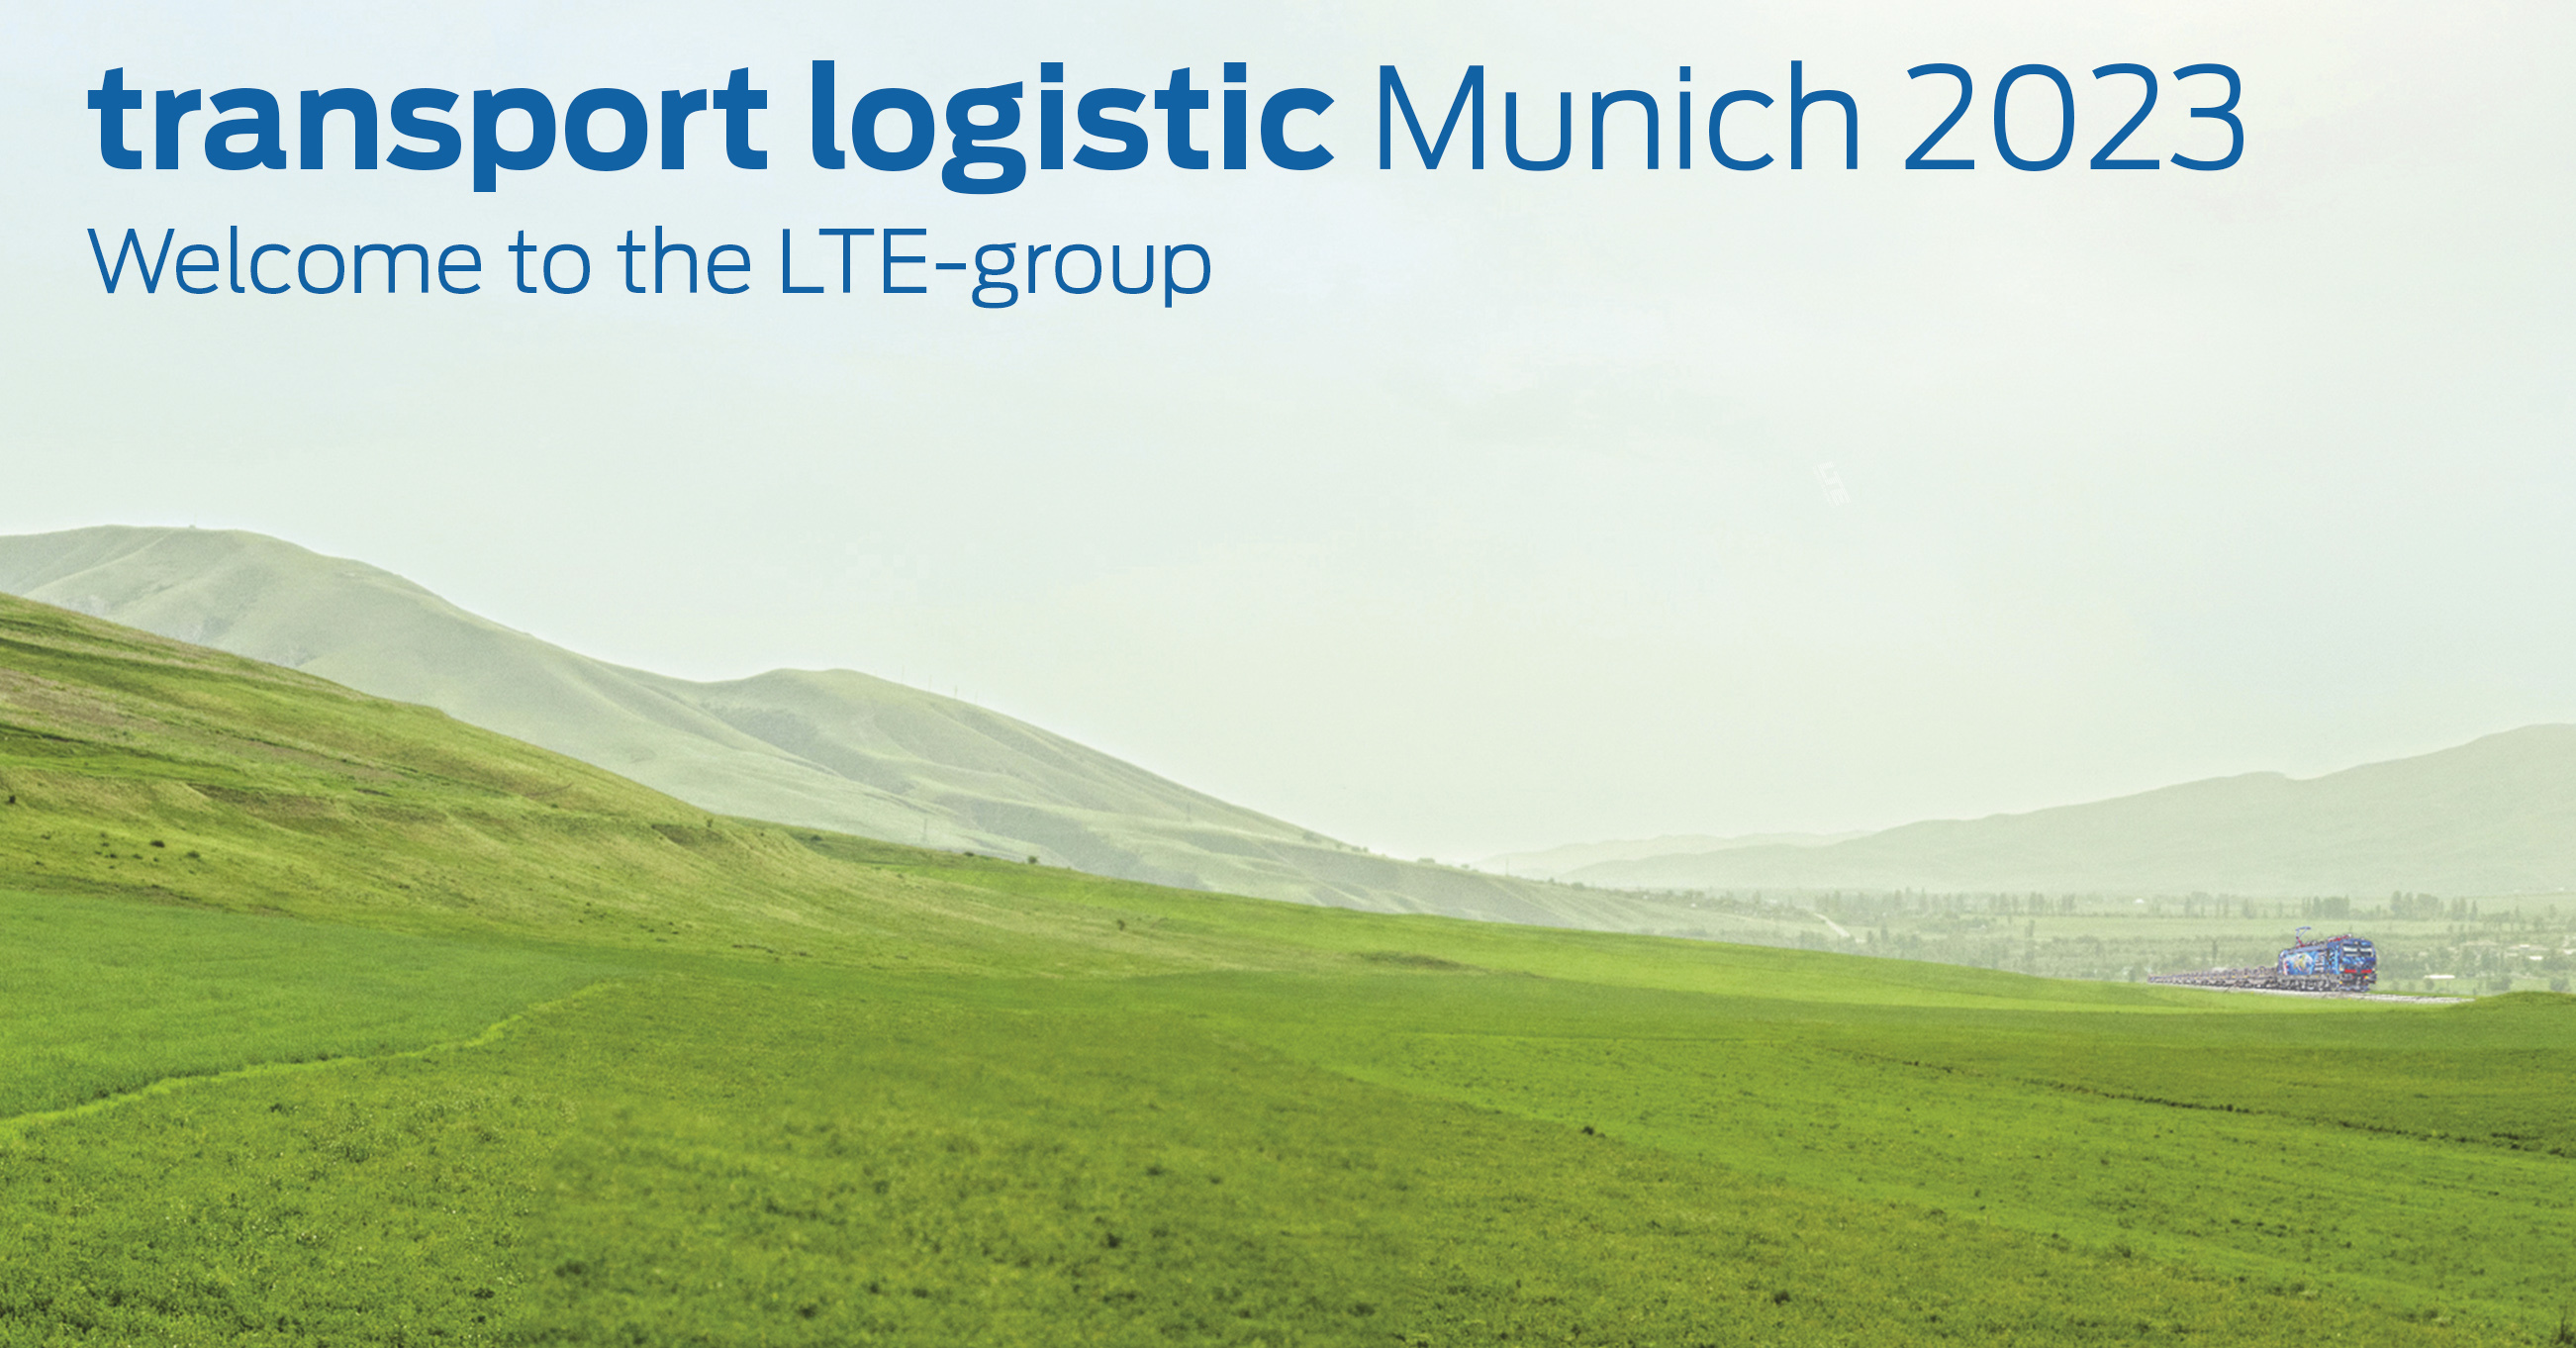 LTE-group @ transport & logistic - the preview